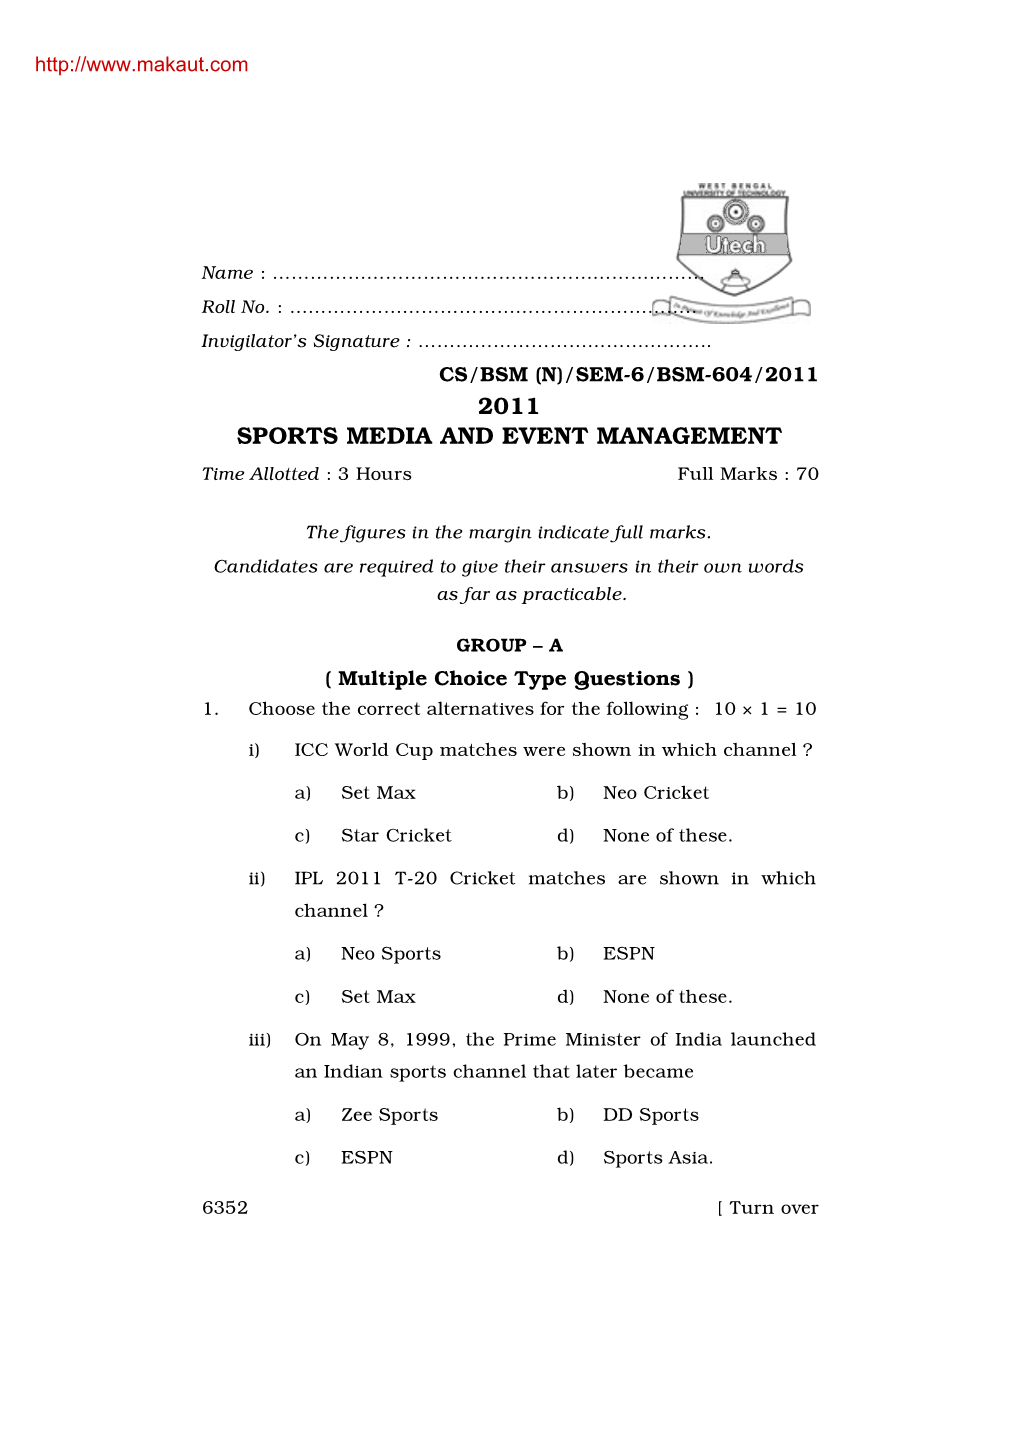 2011 SPORTS MEDIA and EVENT MANAGEMENT Time Allotted : 3 Hours Full Marks : 70